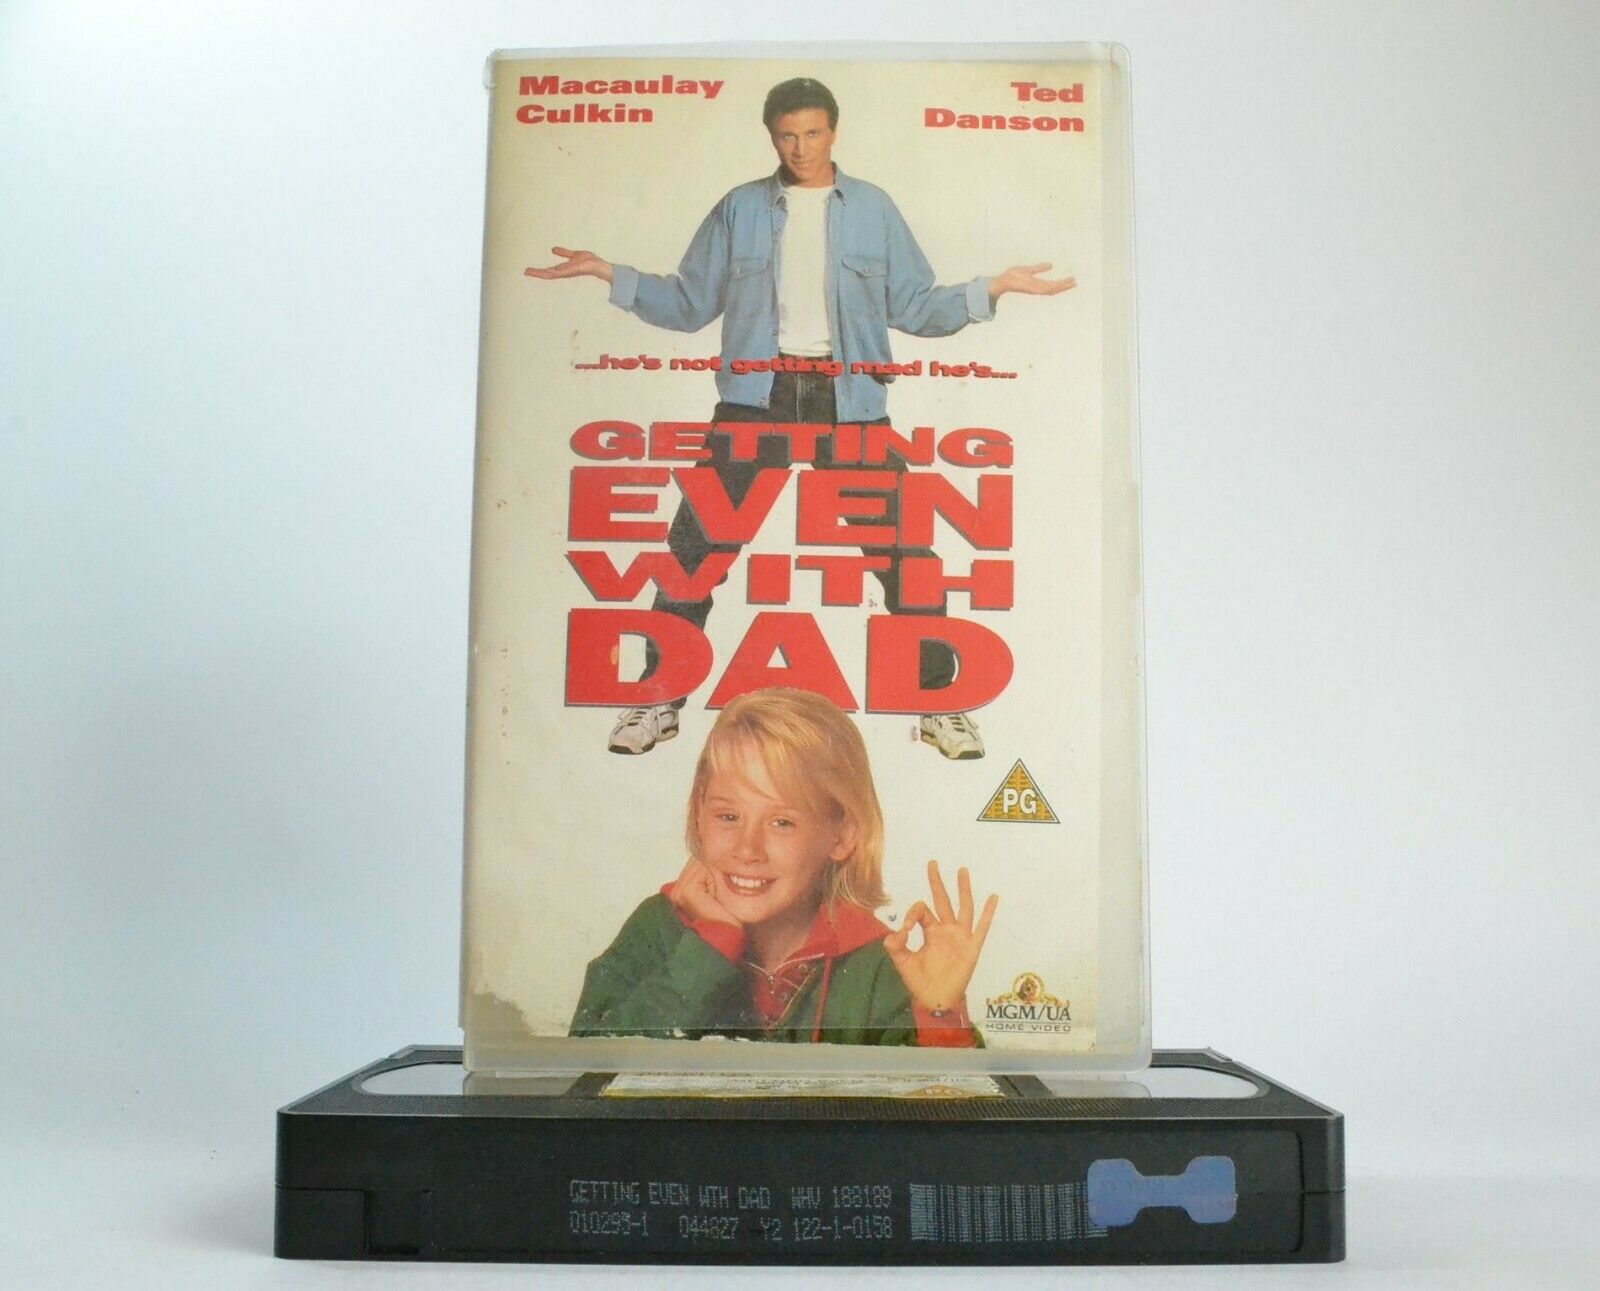 Getting Even With Dad: Family Disaster - Large Box - Macaulay Culkin - Pal VHS-